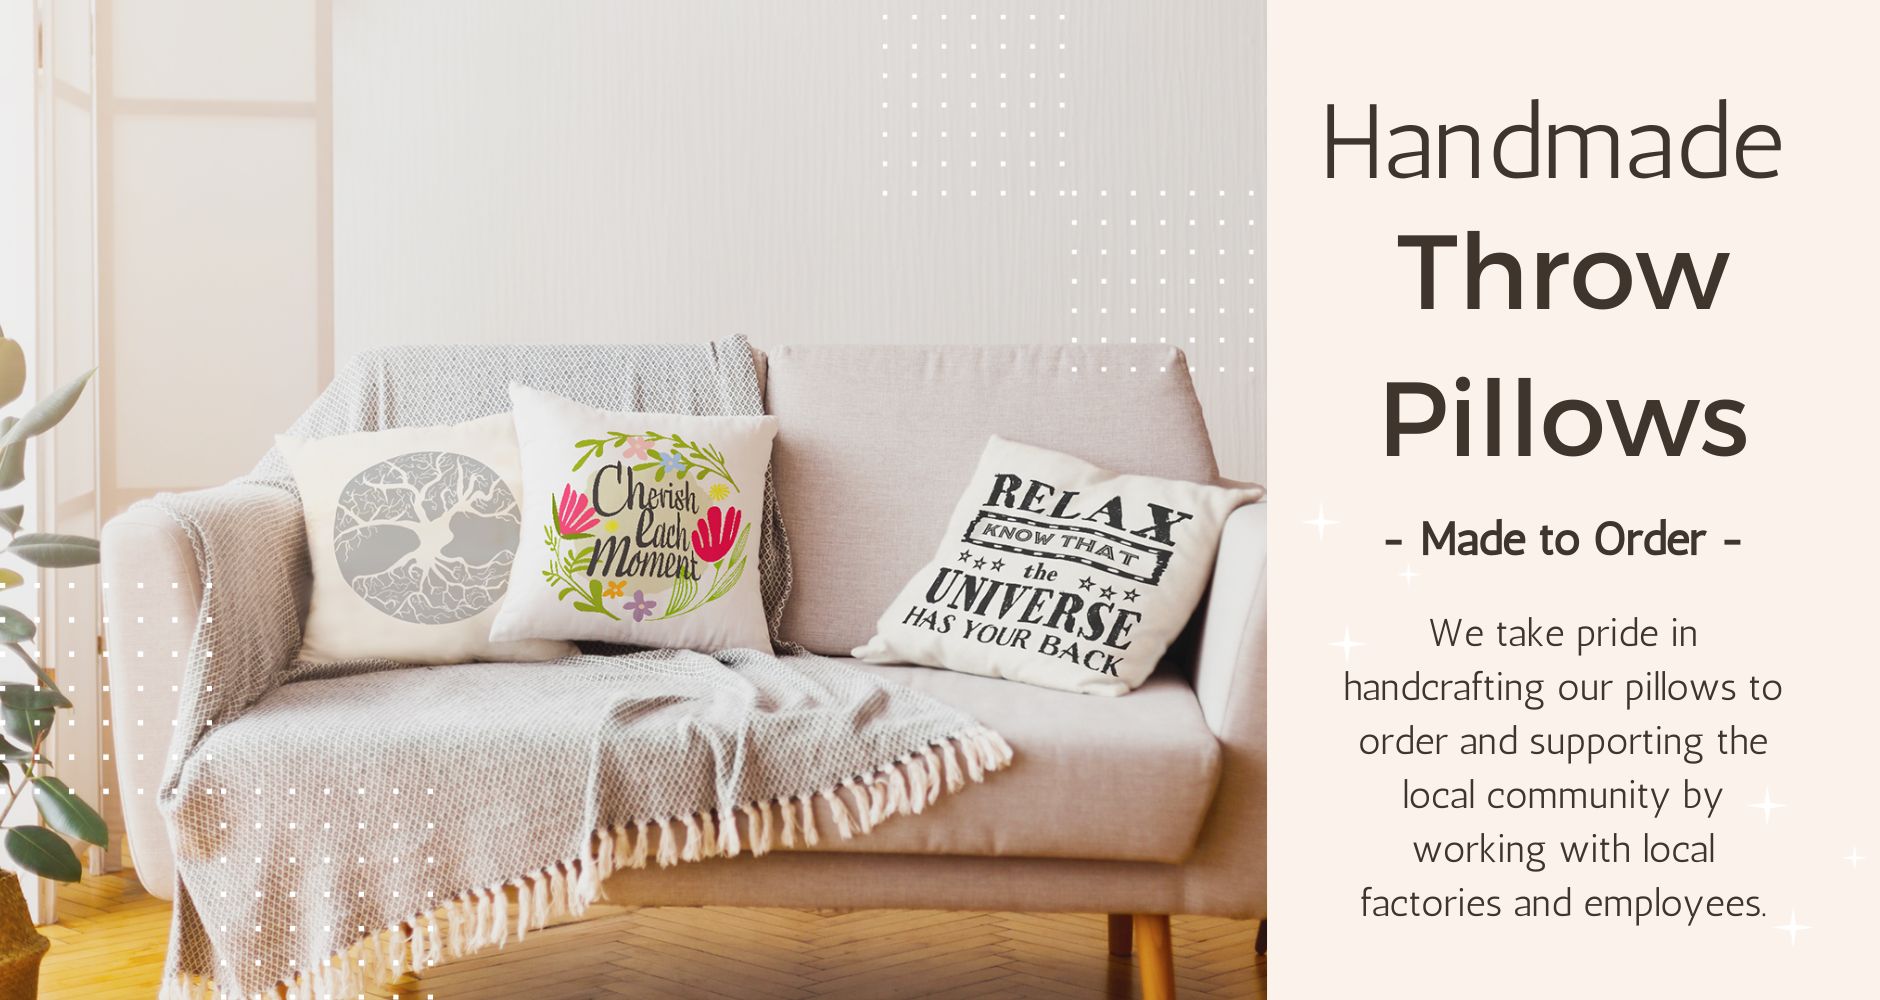 Handmade, throw pillows, accent pillows, artisan-crafted, decorative cushions, unique designs, cozy textiles, personalized accents, home embellishments, bespoke pillow creations.